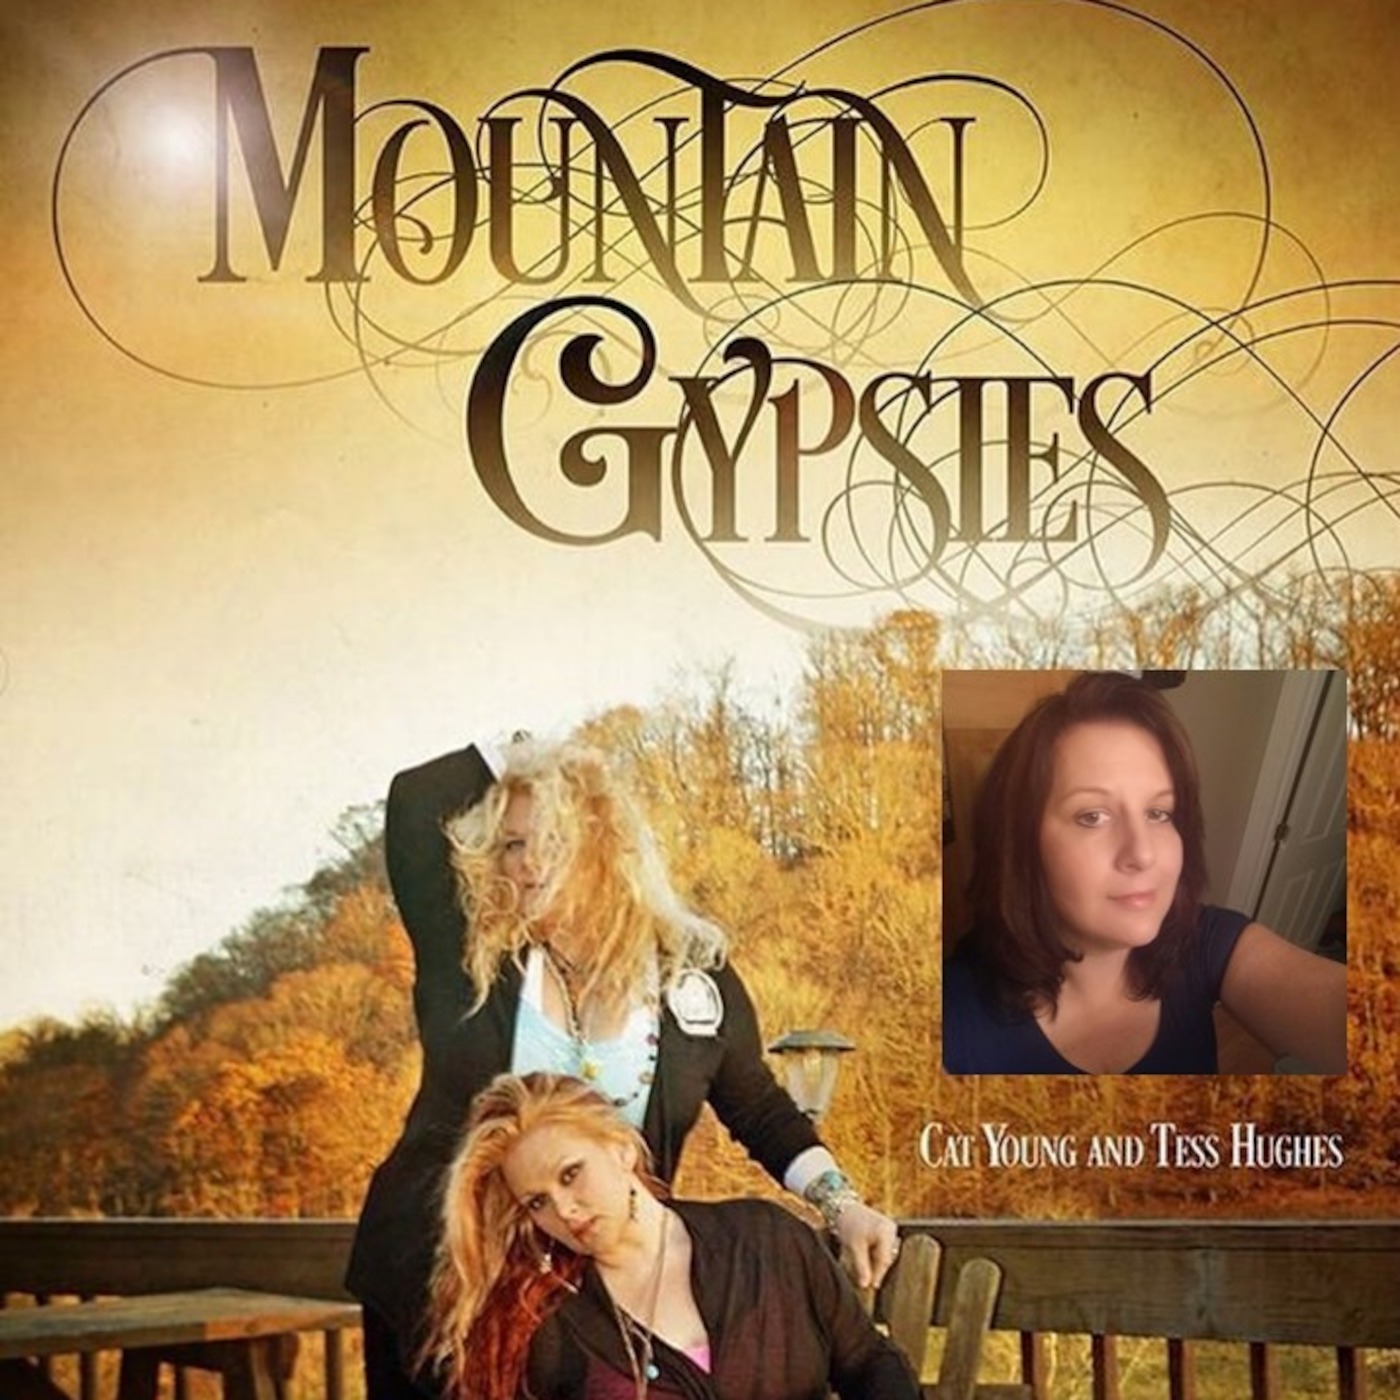 9/4/2016 Cat and Tess the Mountain Gypsies with special guest Dana Wingerd